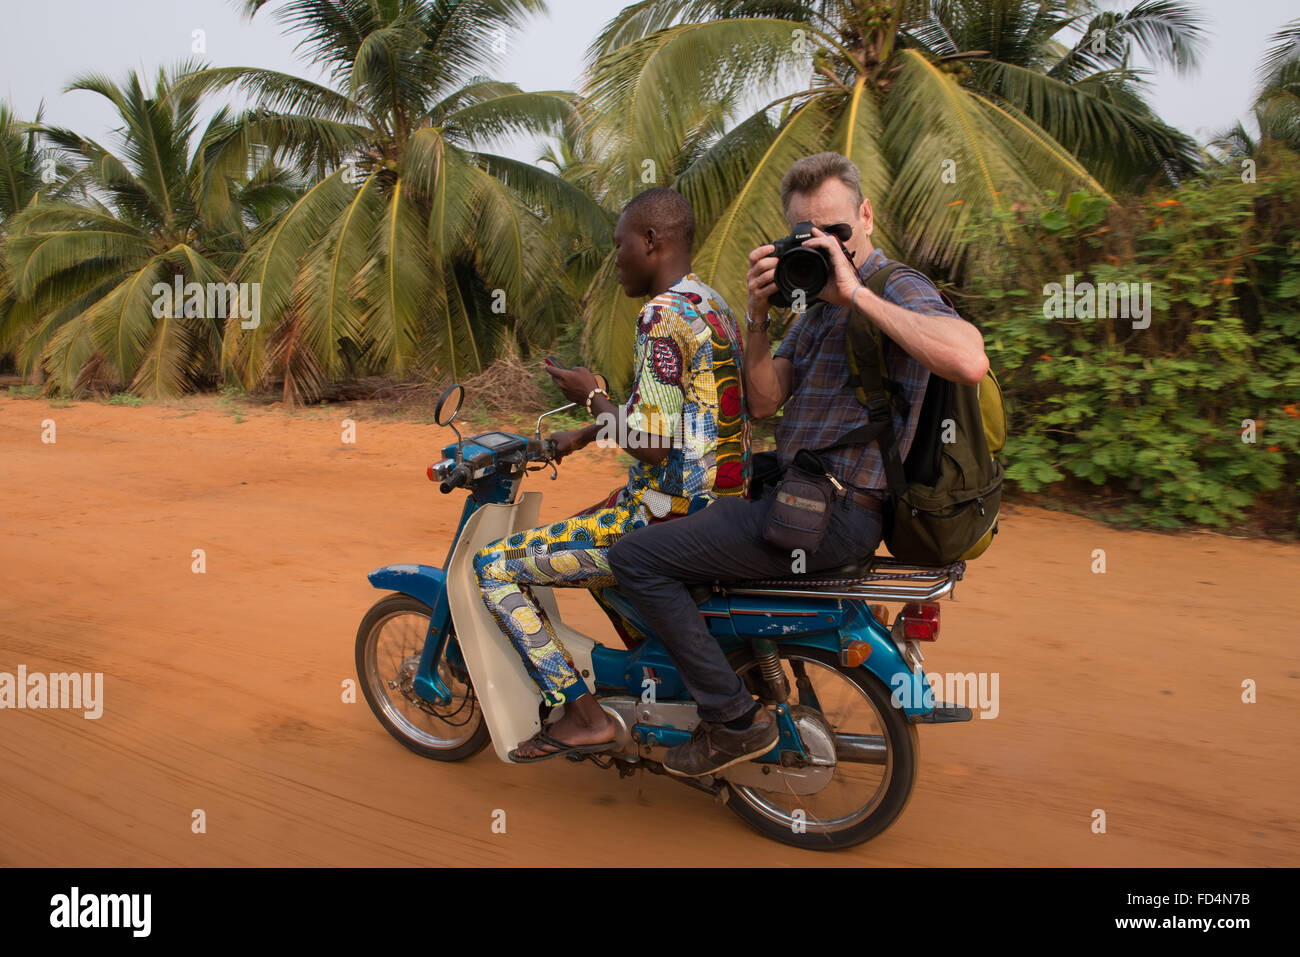 Photographer on a motorcycle taxi Stock Photo - Alamy